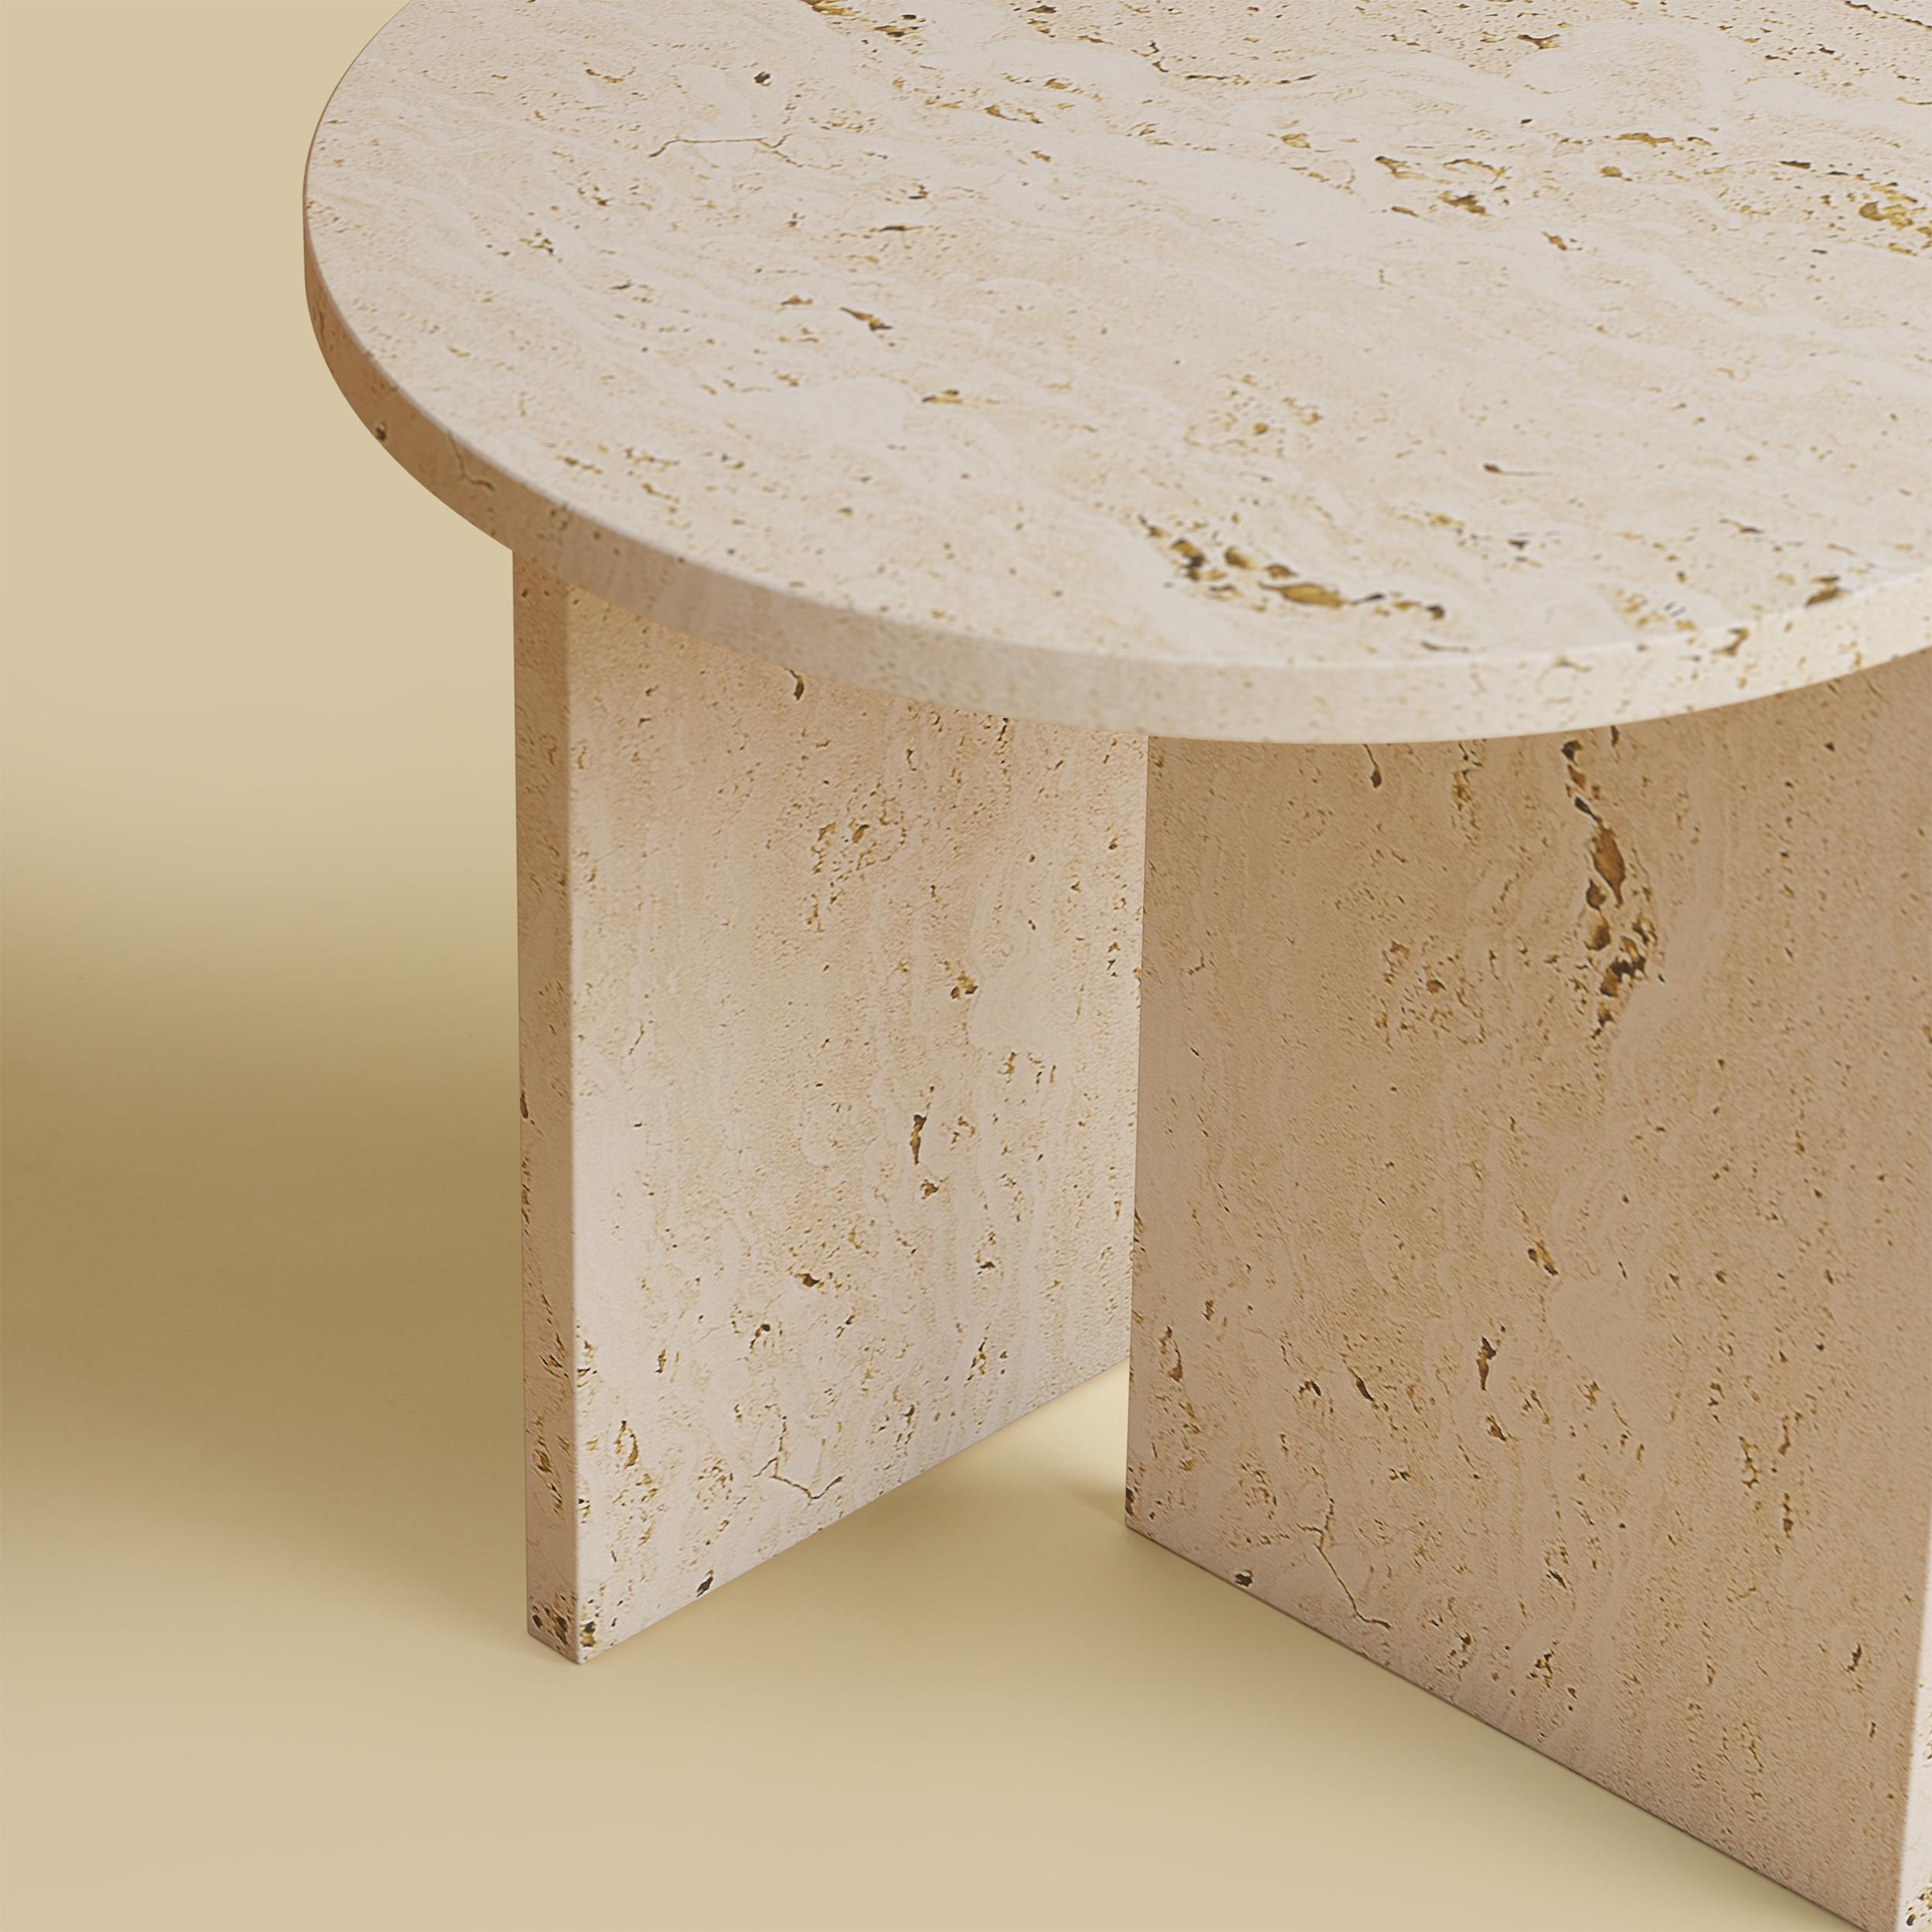 The Kyushu coffee table is made entirely of Roman Travertine. The top is circular and 45cm in diameter, the legs are made from two marble boards in which one part is inlaid on the top as a very elegant detail.
Artisanal production made of